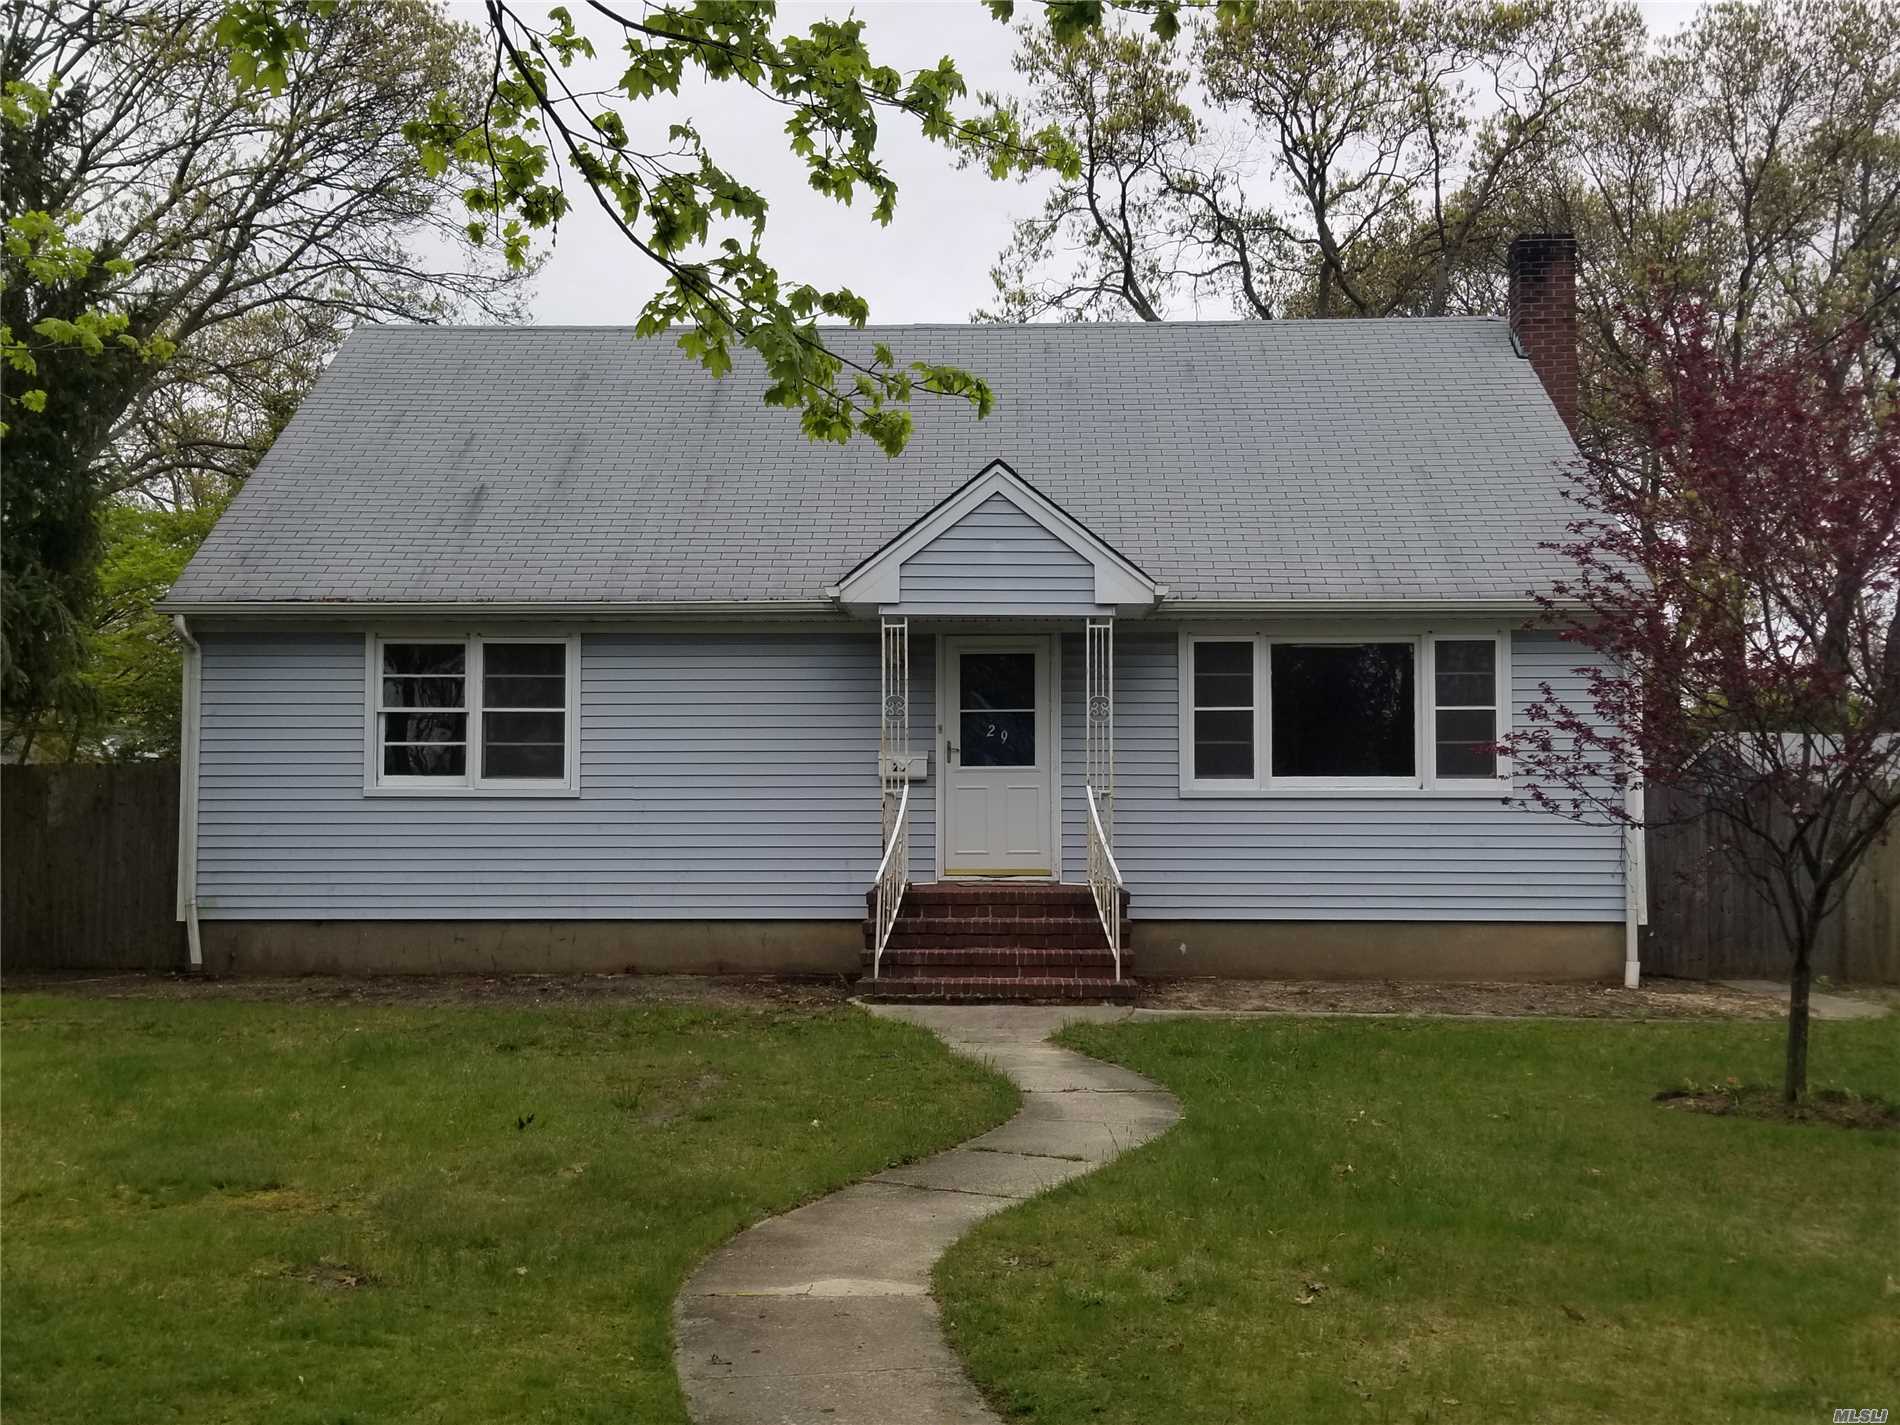 Huge Custom Cape Much Larger Than The Conlu Park Cape W/ Formal Dining Room, Oak Floors, Large Bedrooms, Full Finished Basement W/ Outside Entrance, Great Area And Schools, Lots Of Potential, Many Options.